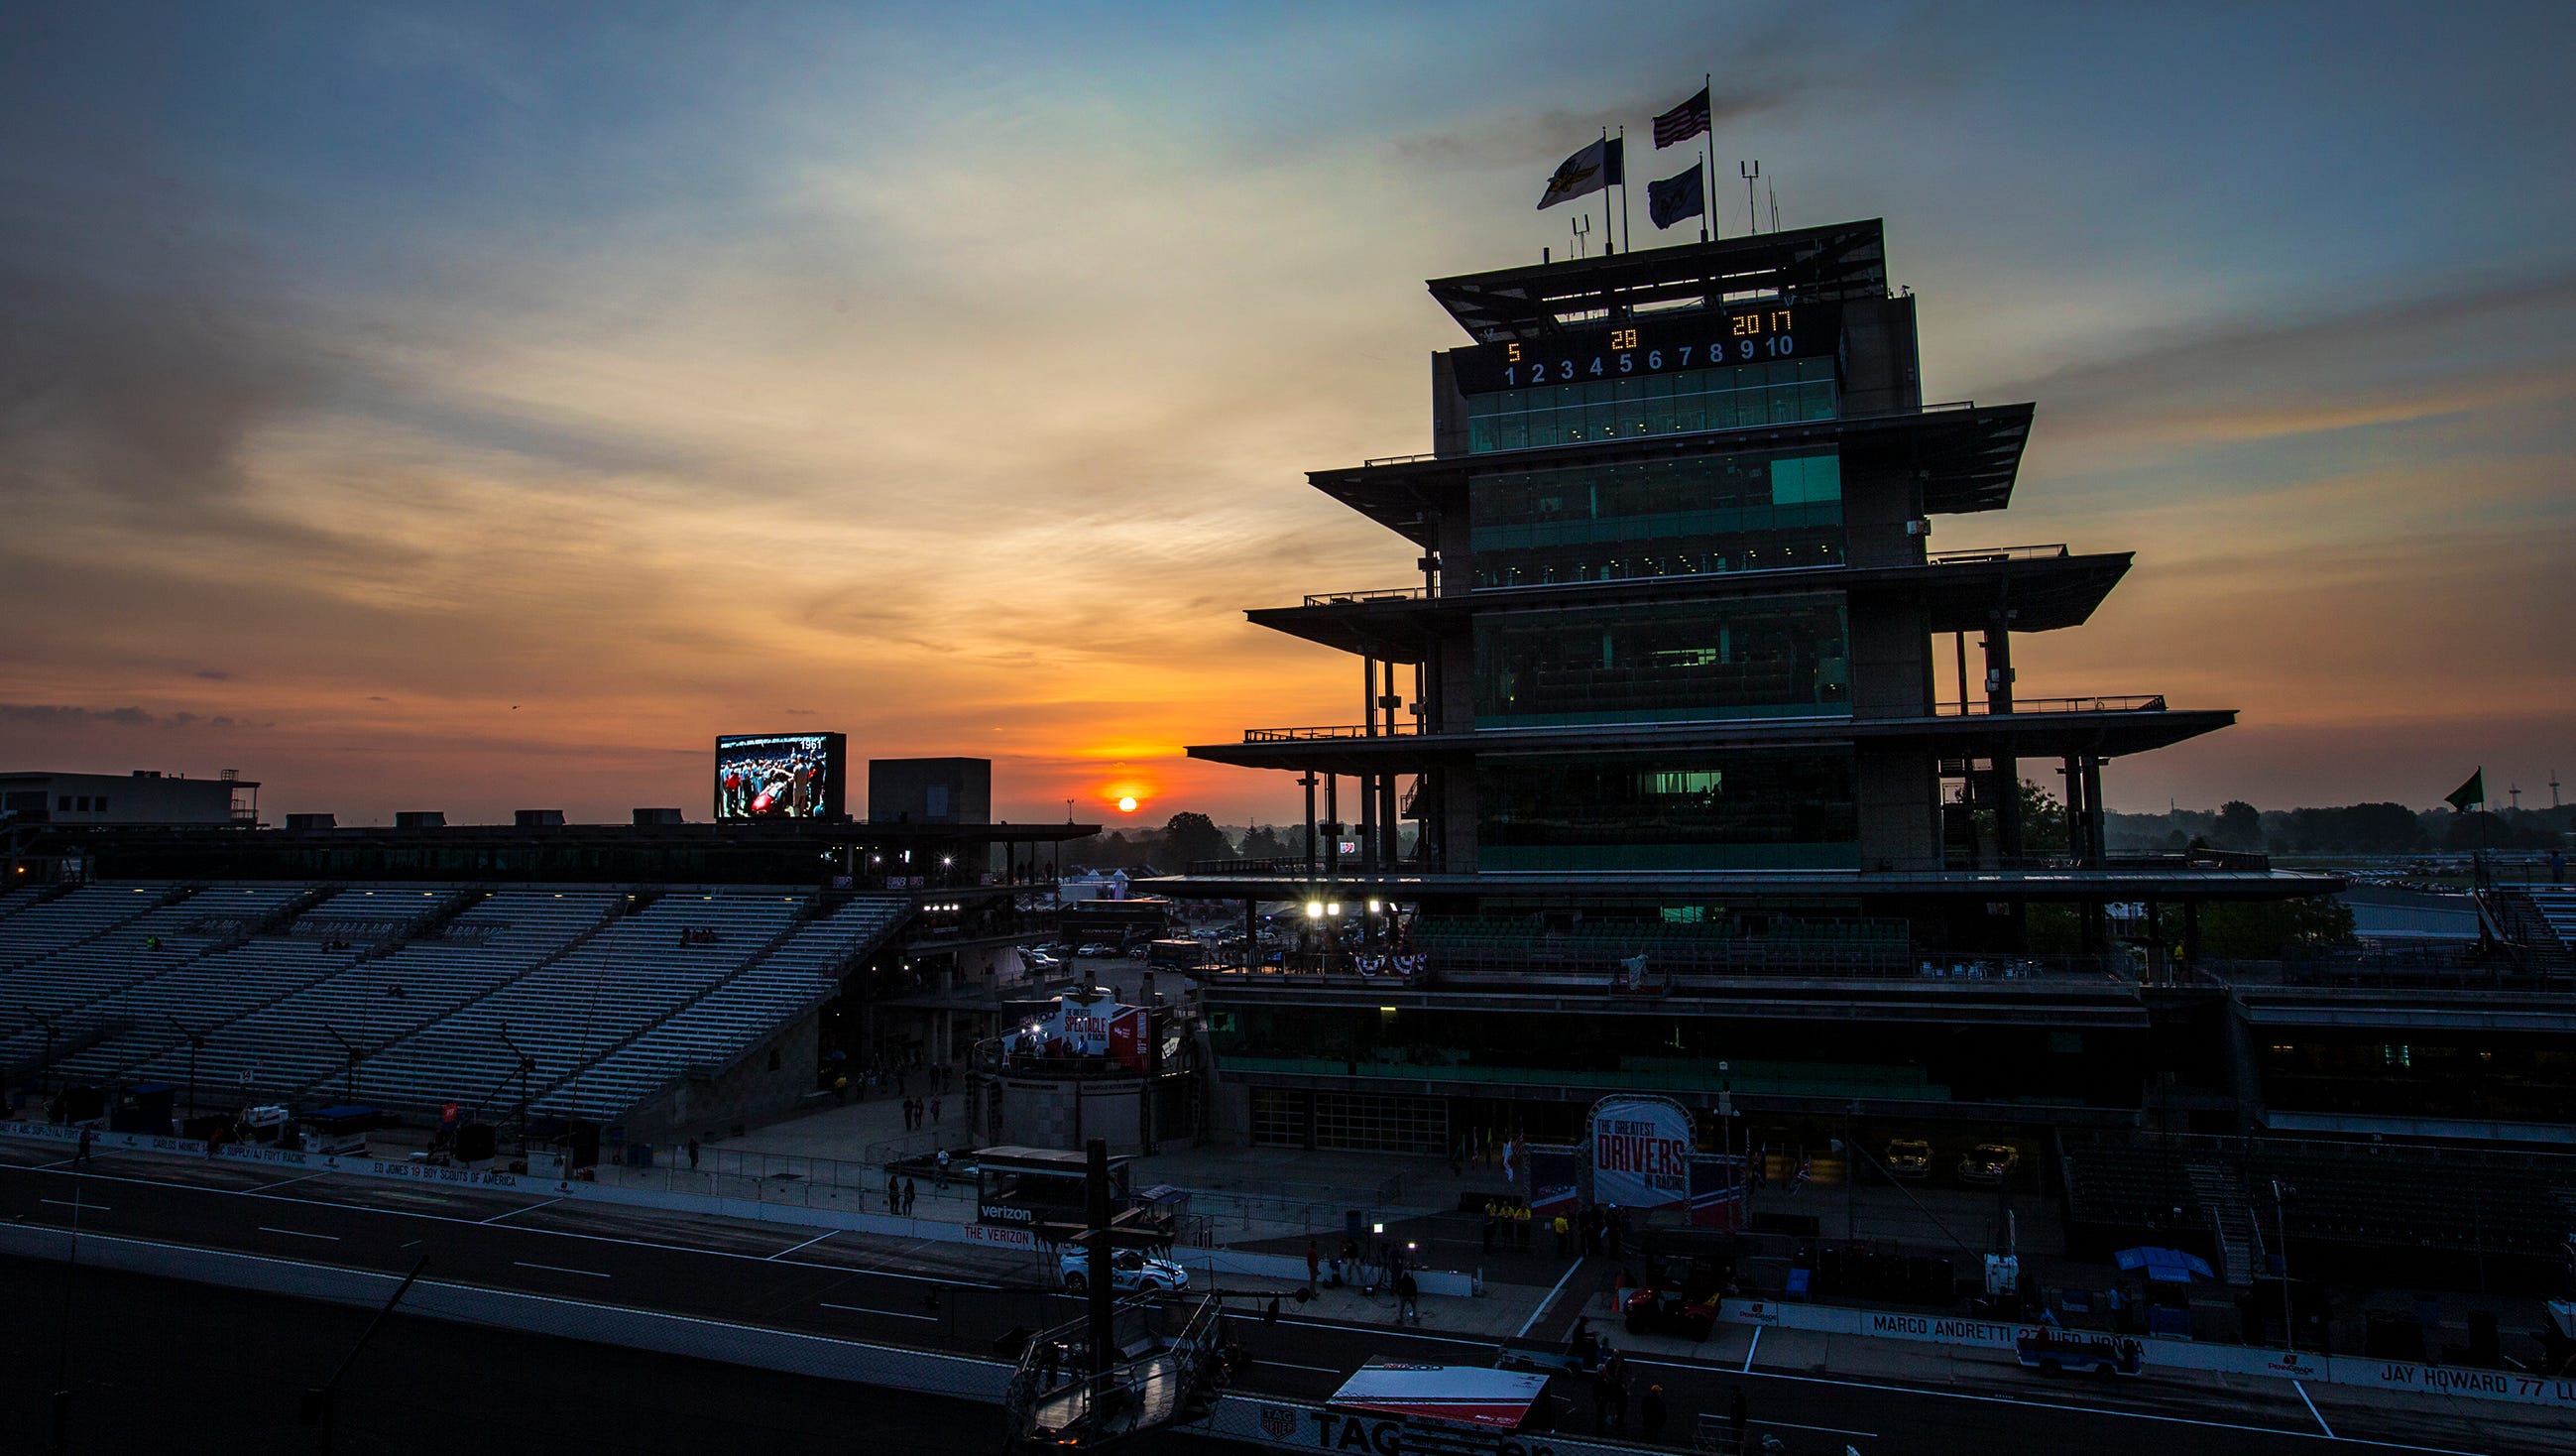 Here's the 2019 Indy 500 entry list